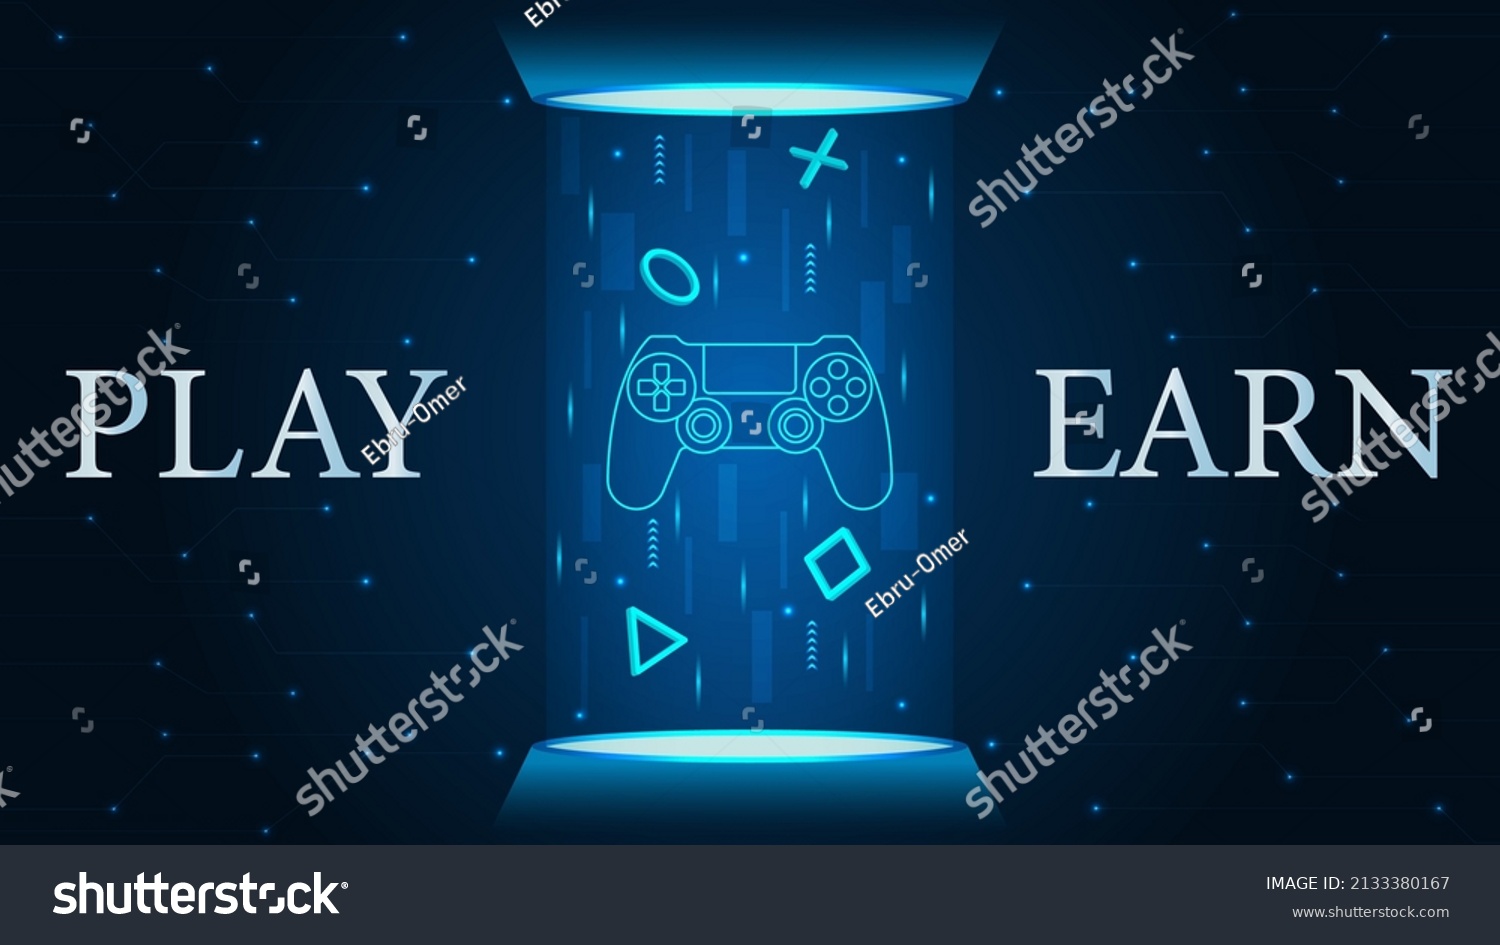 SVG of Metaverse, Play to Earn, concept vector illustration. Joystick in podium with hologram effect concept for banner, website, landing page, ads. svg